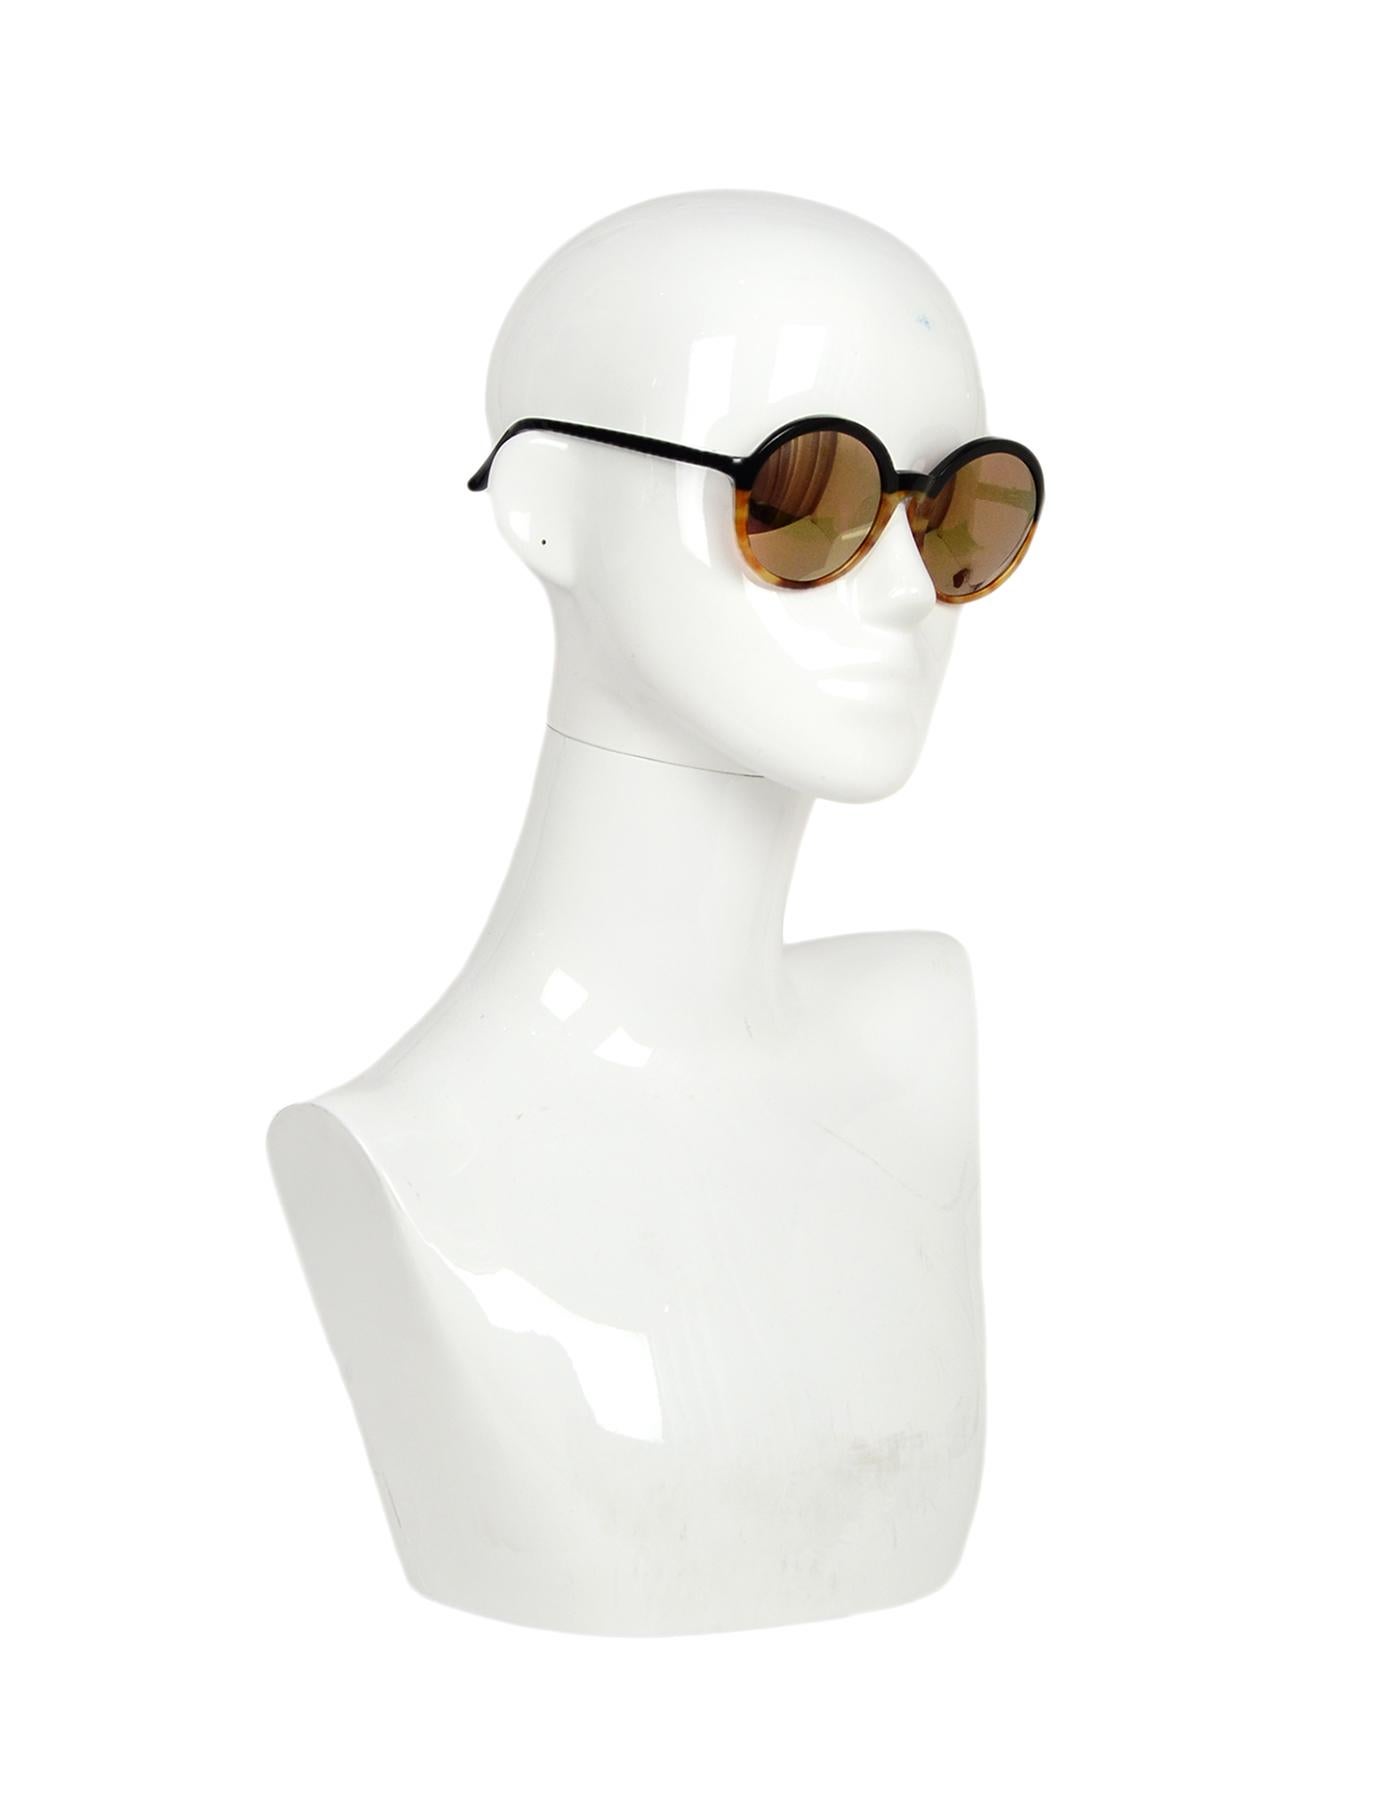 Phillip Lim Black Milky Tortoise Round Mirrored Sunglasses 

Made In: Japan
Color: Black, beige
Hardware: Silvertone hardware
Materials: Resin 
Overall Condition: Excellent pre-owned condition
Estimated Retail: 295 + tax
Includes:  Box, dust